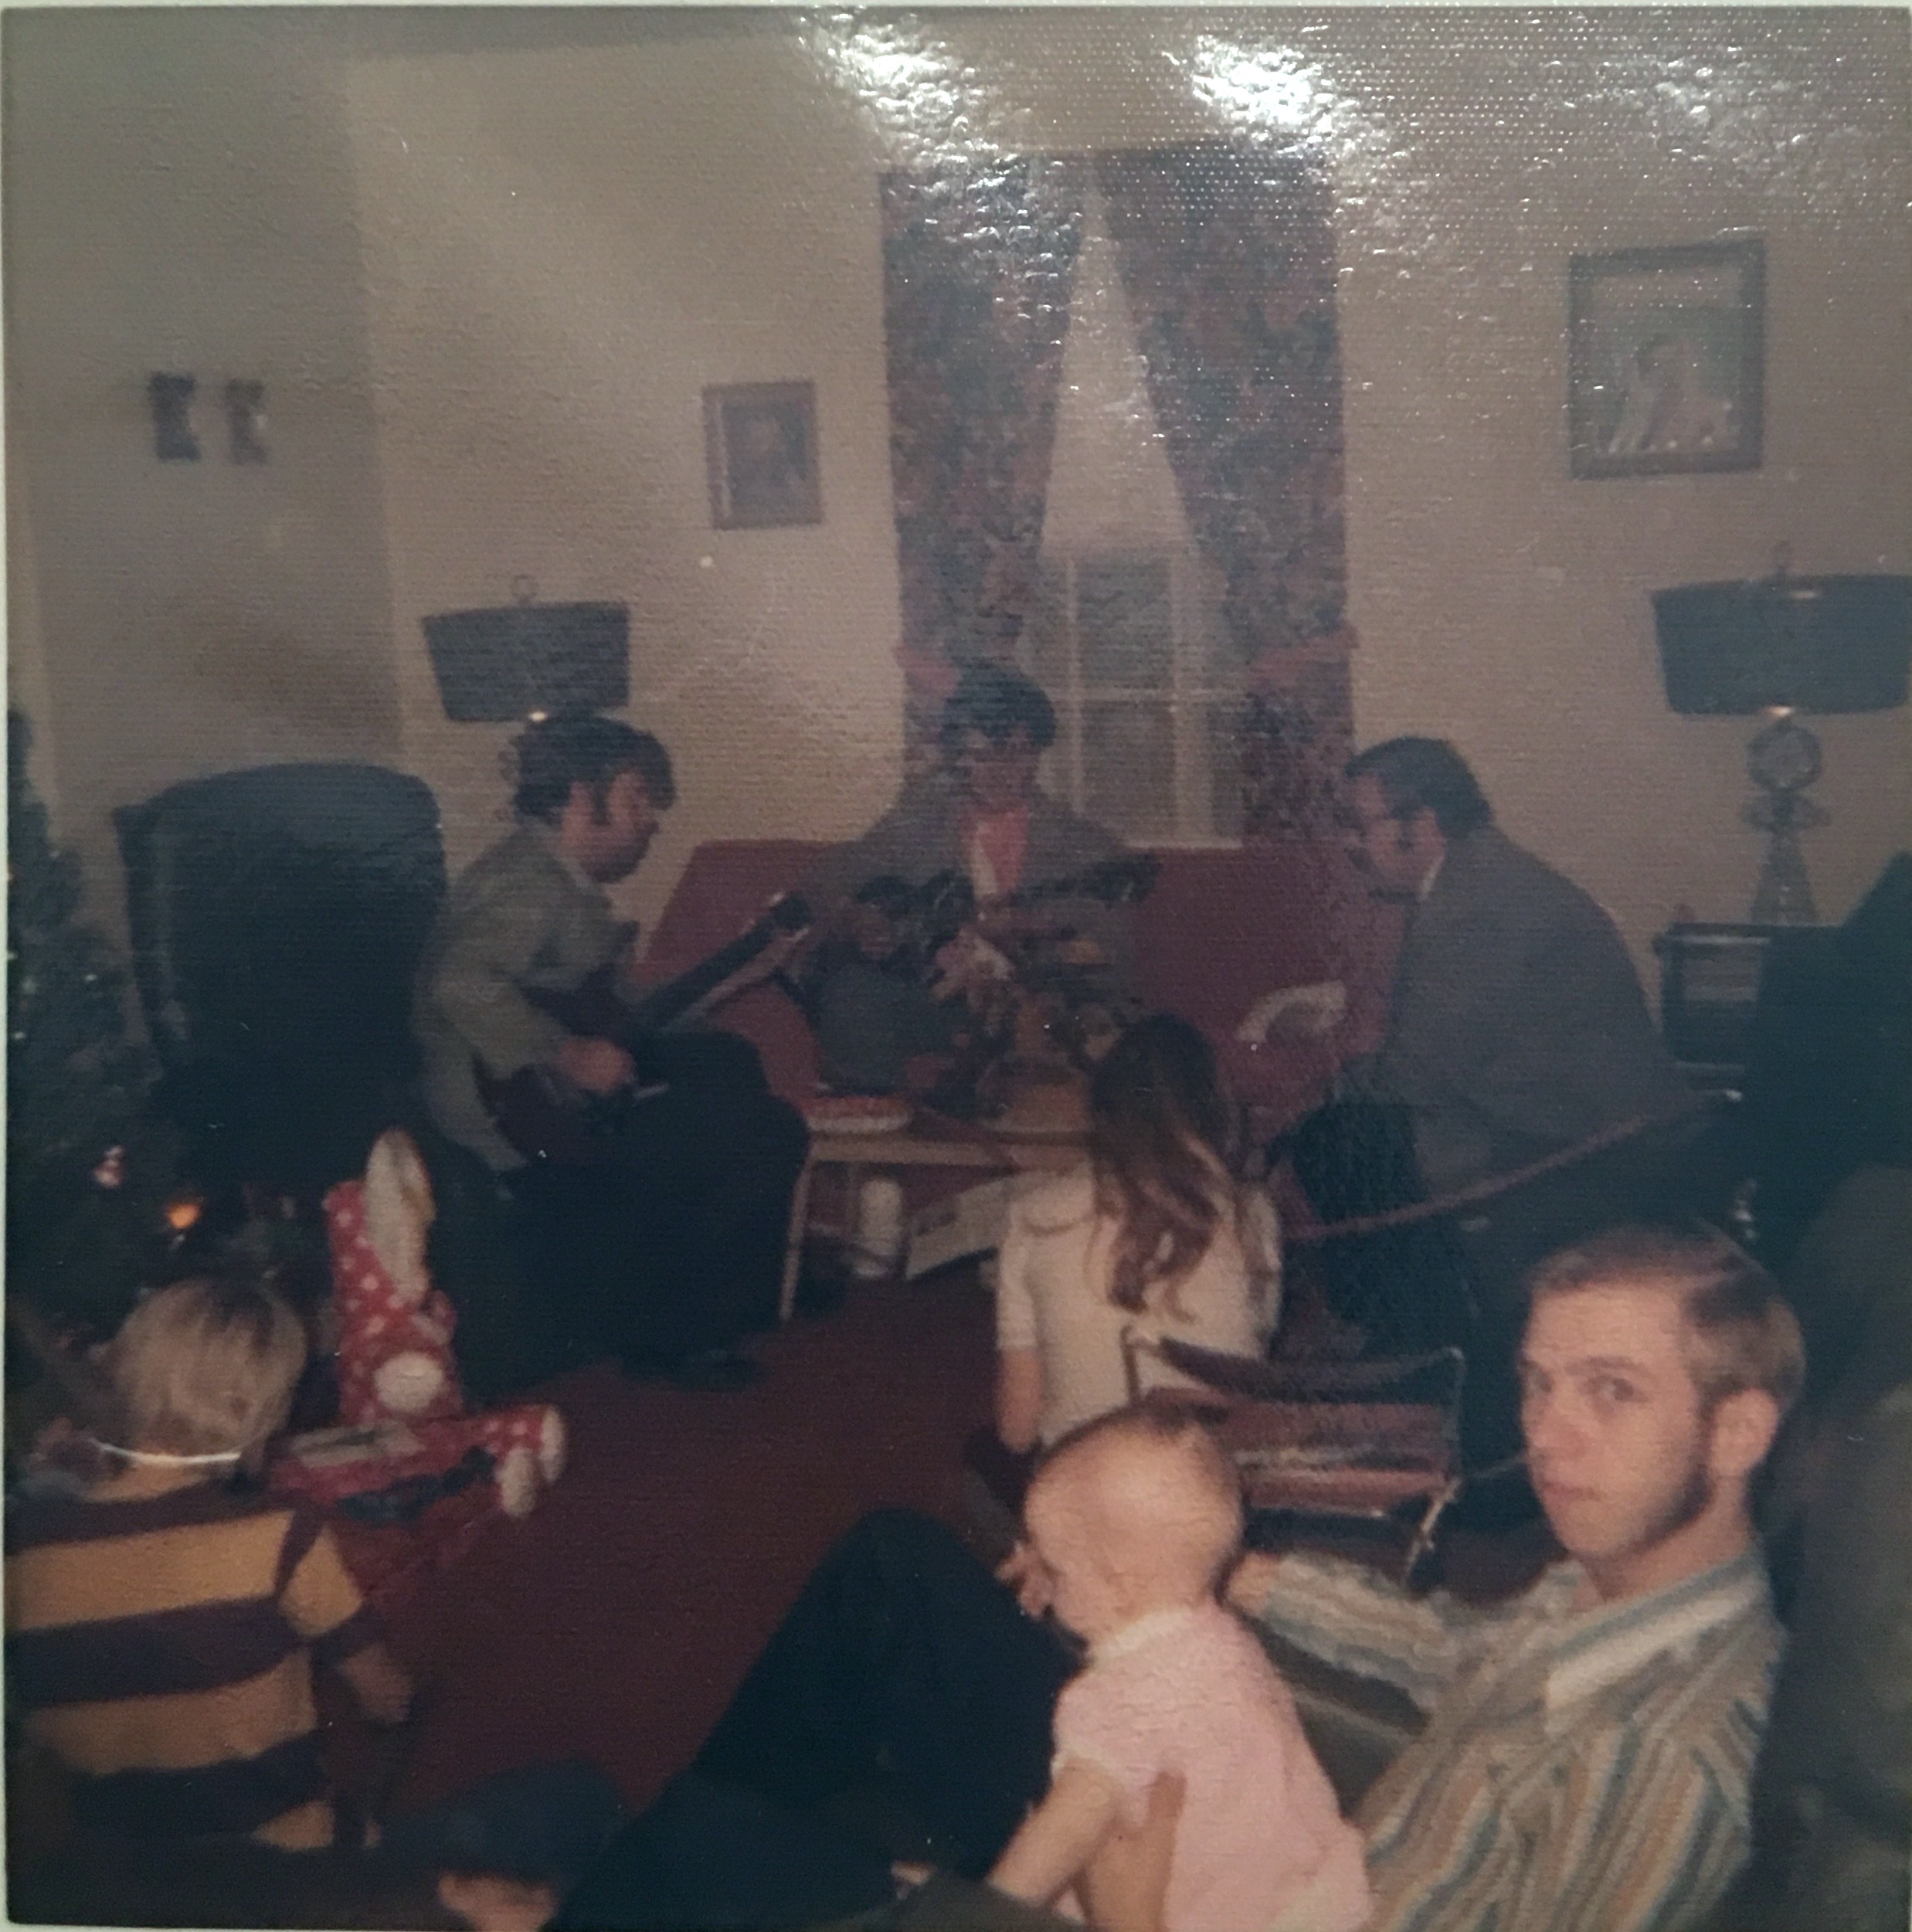 Dennis Watson, Randy Frailey, cousin Vernon Owens, Mike Watson, Gary, Stacey Watson-McIver (baby) and me (1973?)